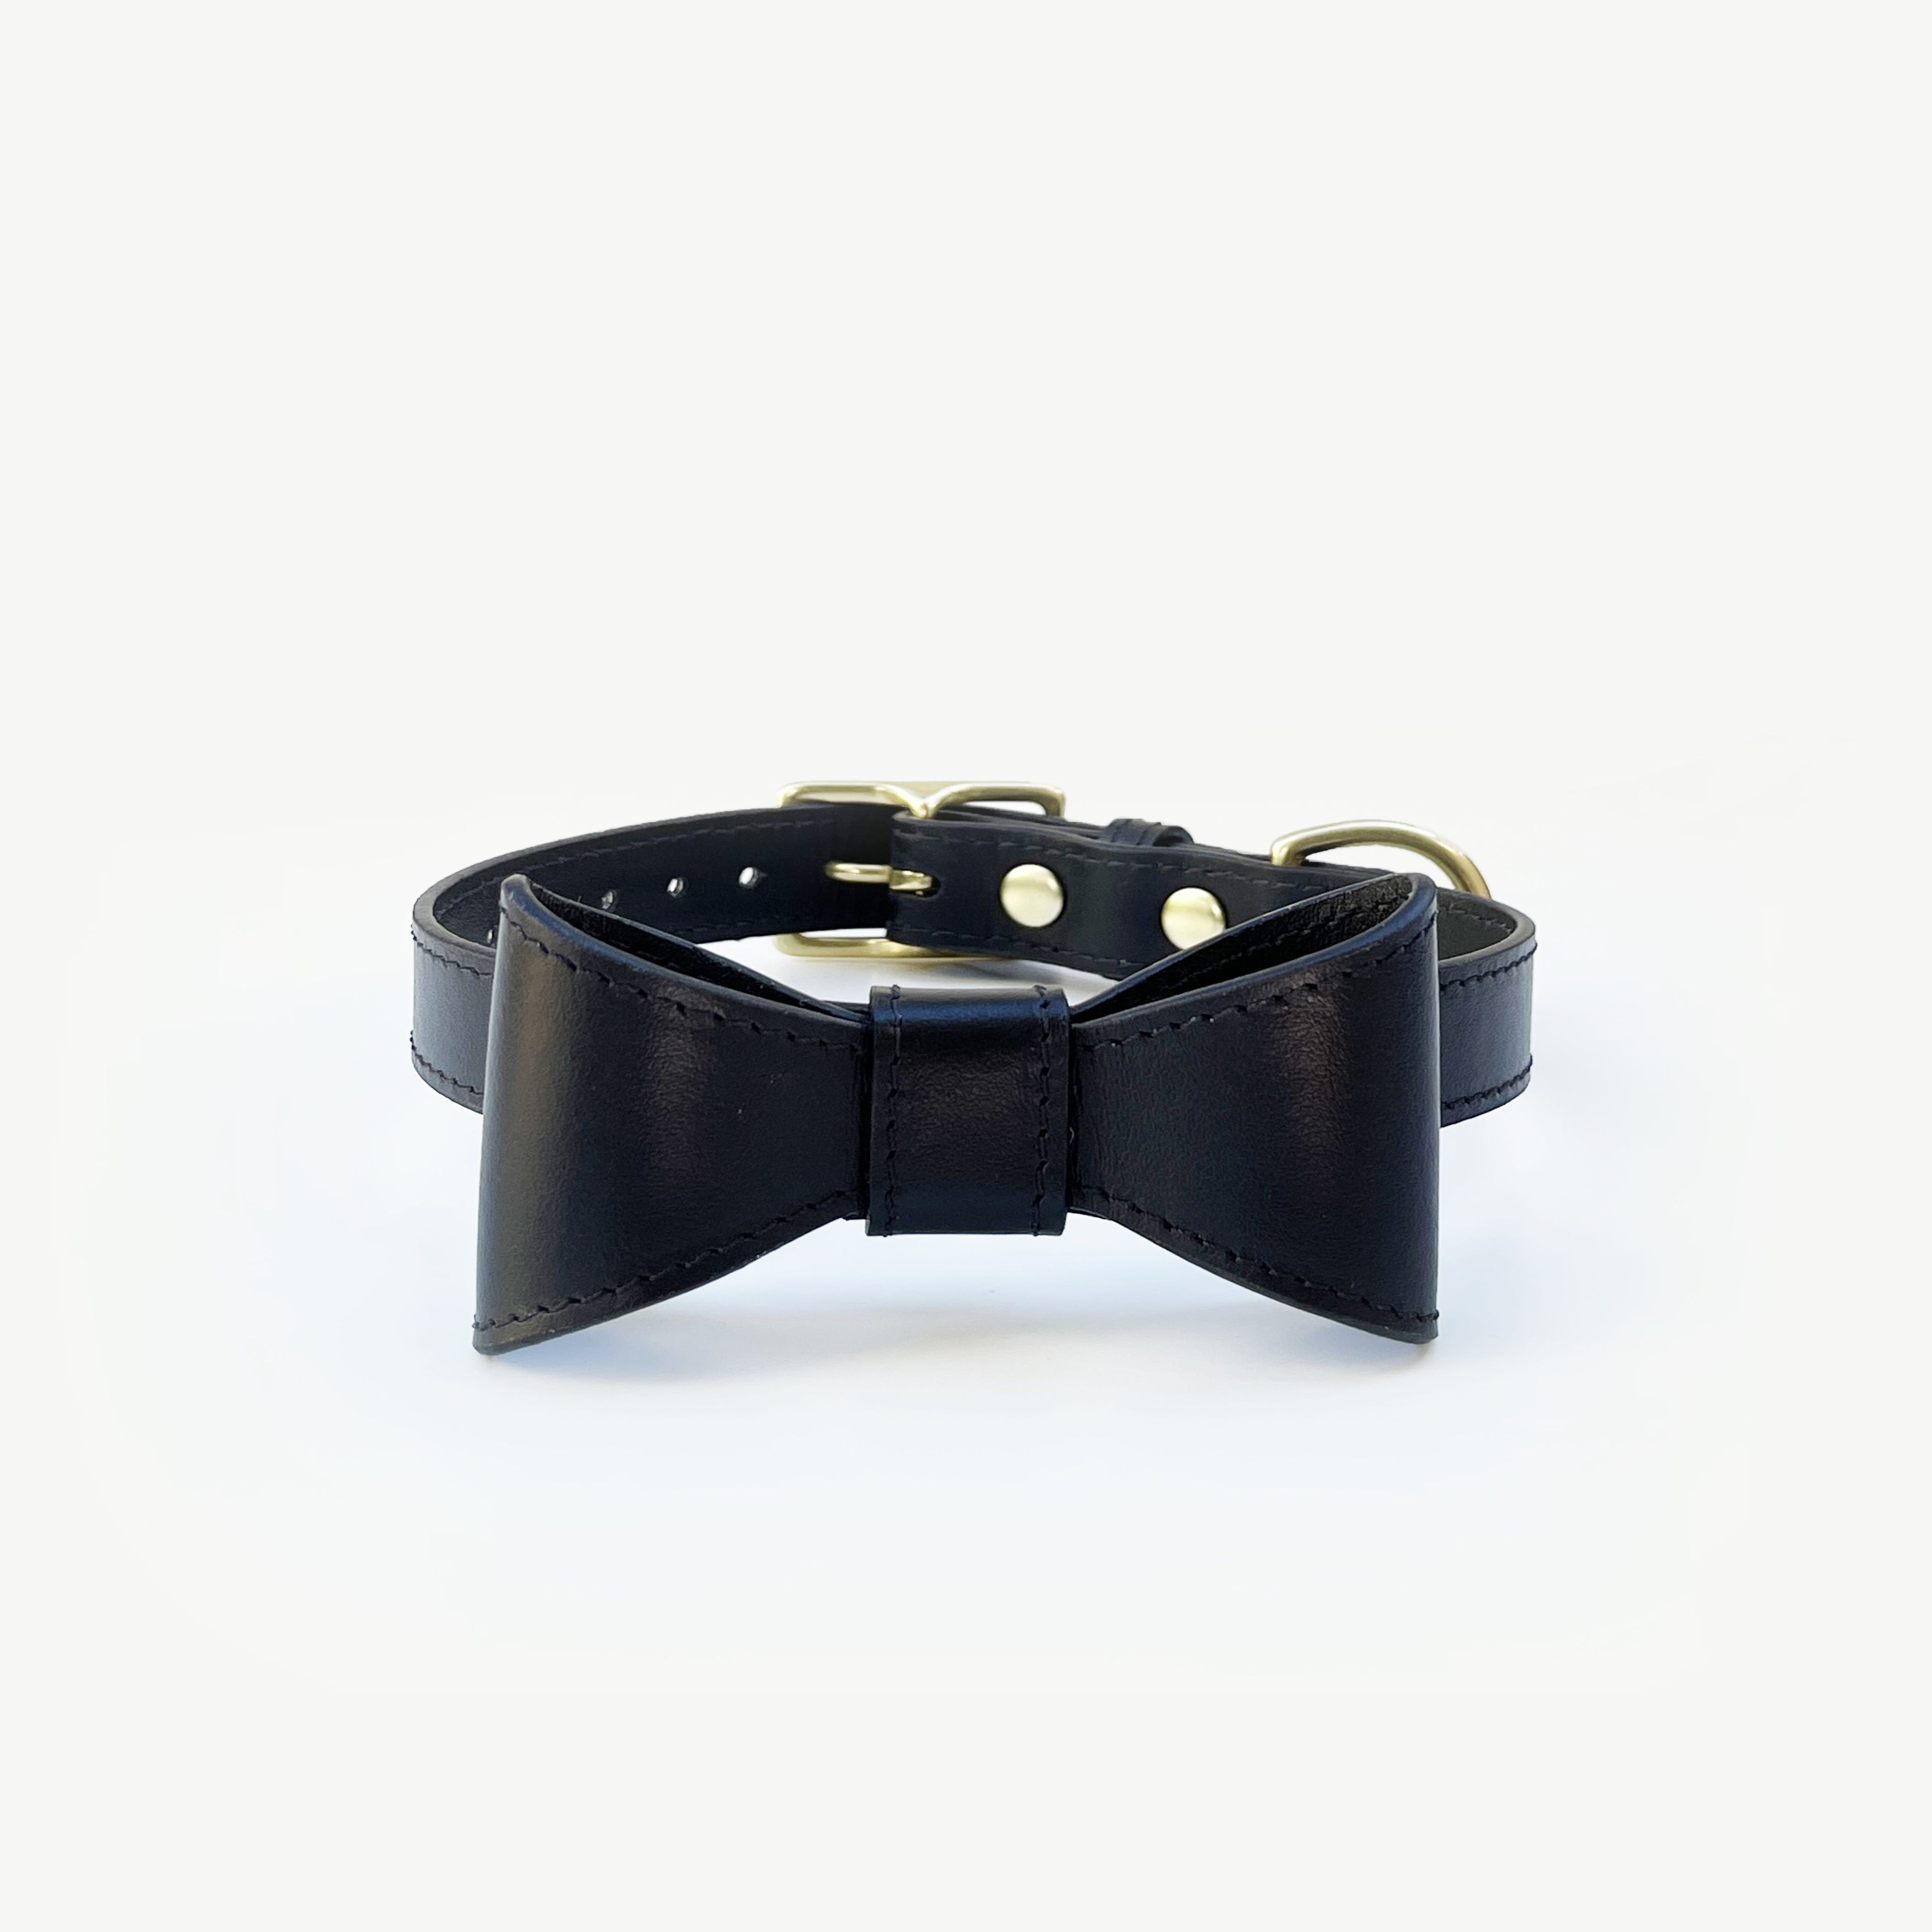 Onyx Black leather collar with removable bow